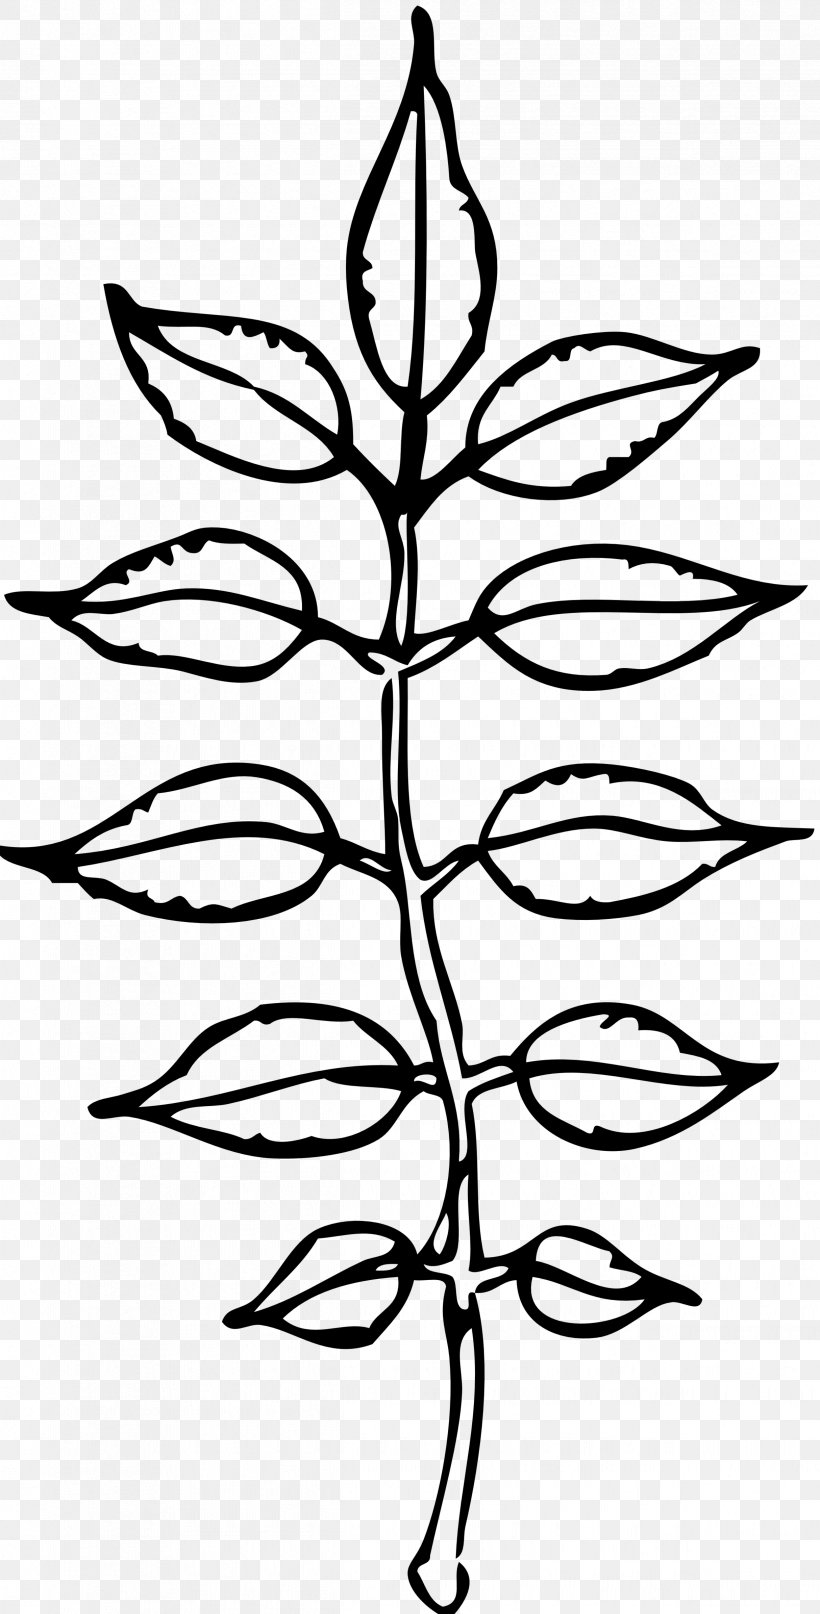 Black And White Leaf Clip Art, PNG, 2427x4779px, Black And White, Autumn, Autumn Leaf Color, Blog, Branch Download Free